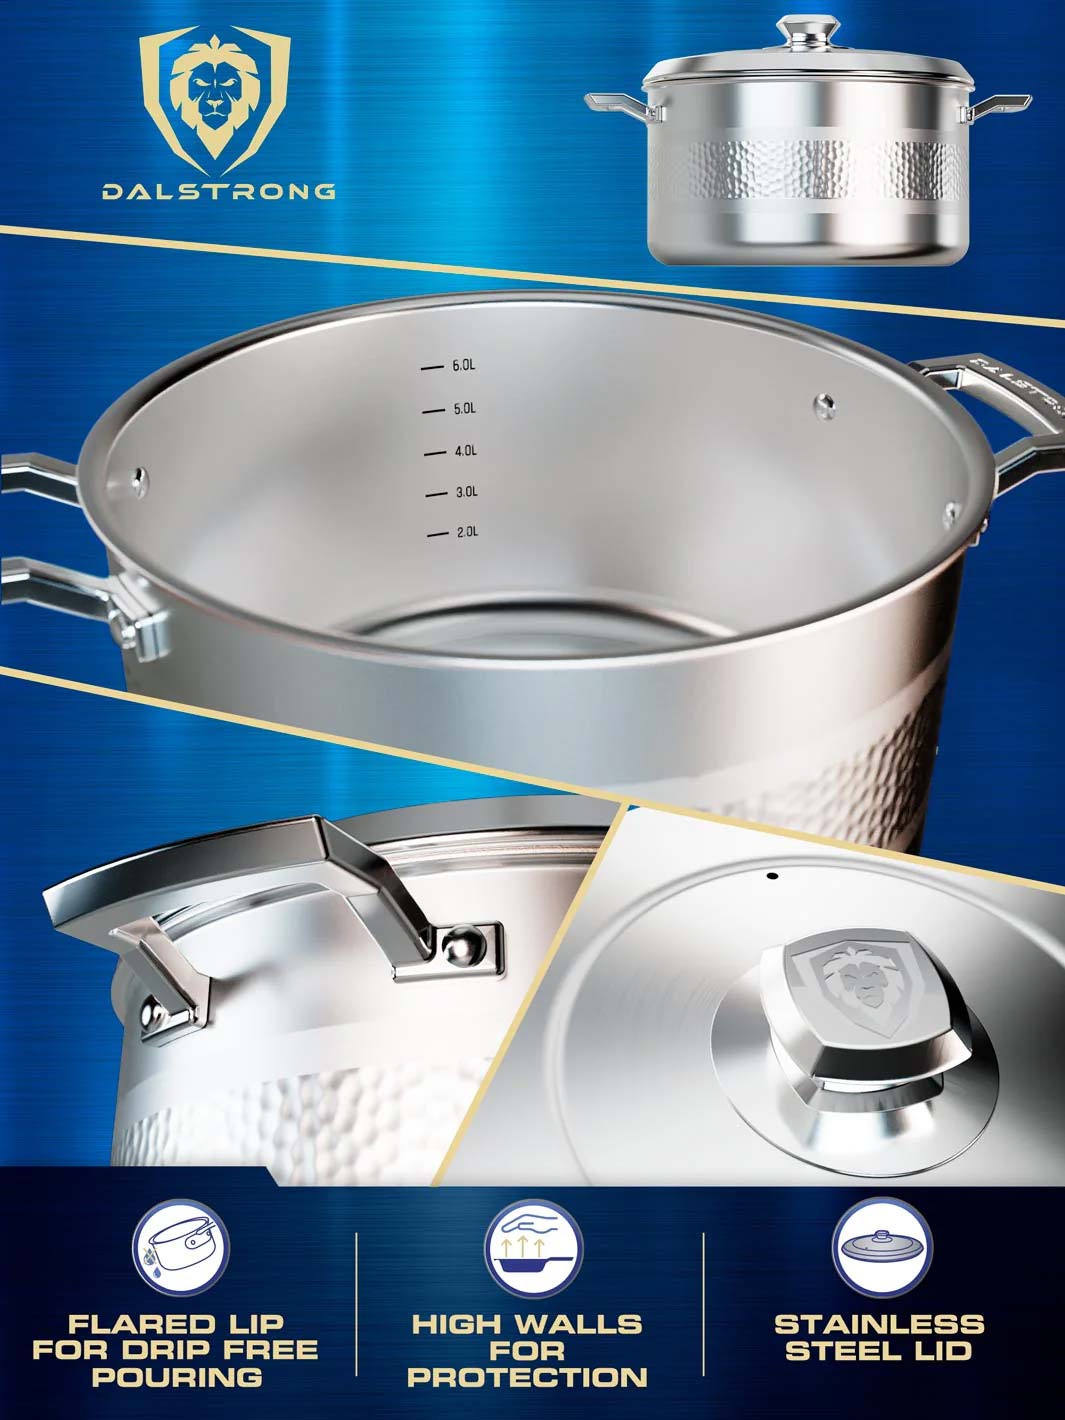 Dalstrong avalon series 3 quart stock pot hammered finish silver showcasing it's high walls and stainless stell lid.